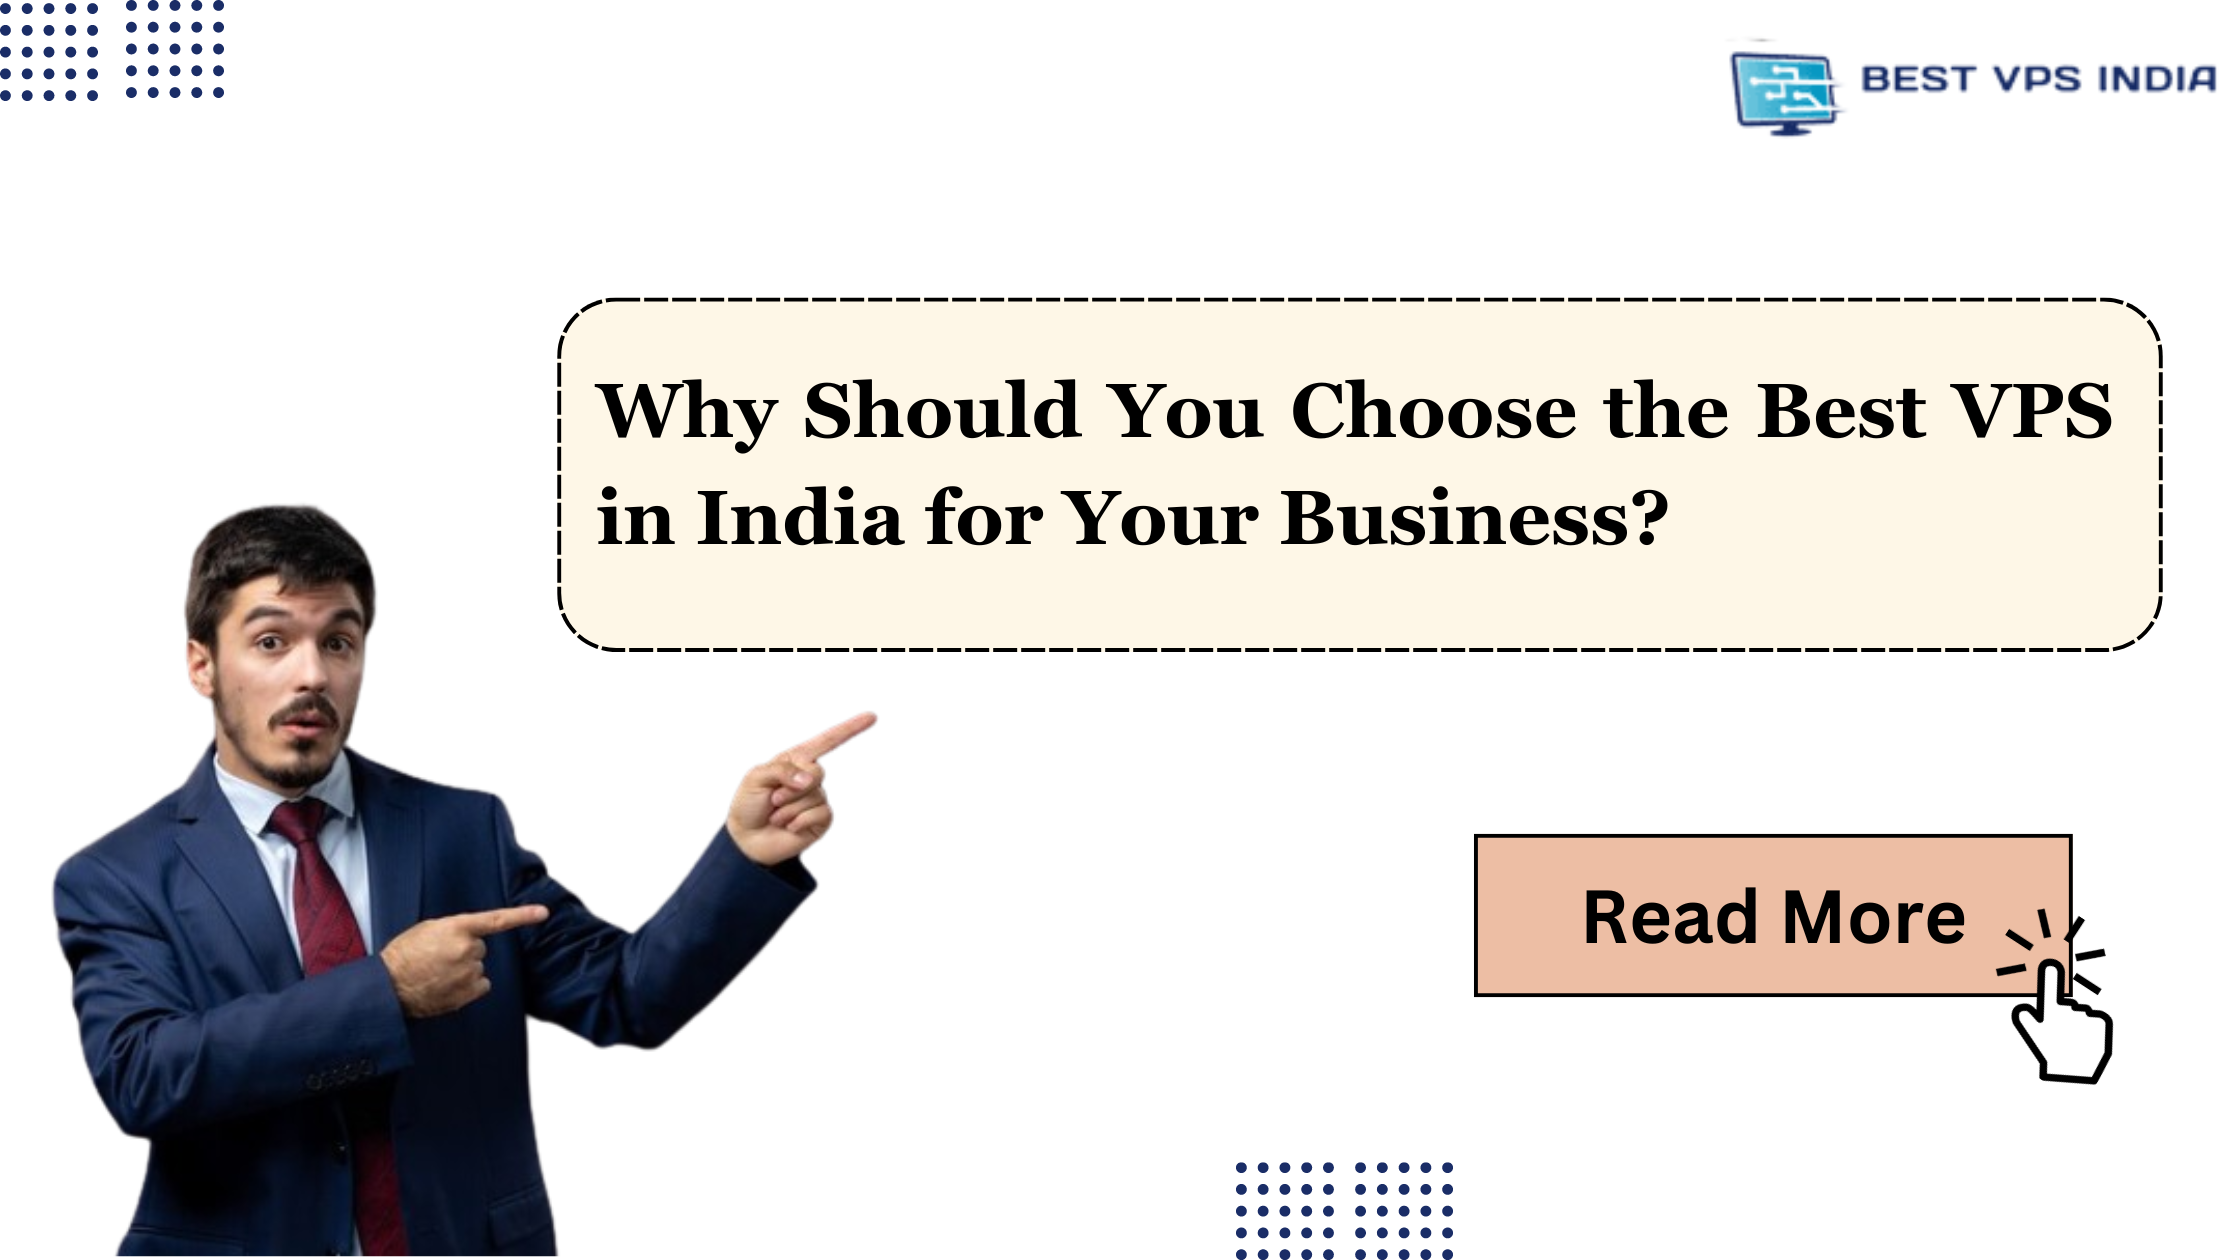 Why Should You Choose the Best VPS in India for Your Business?